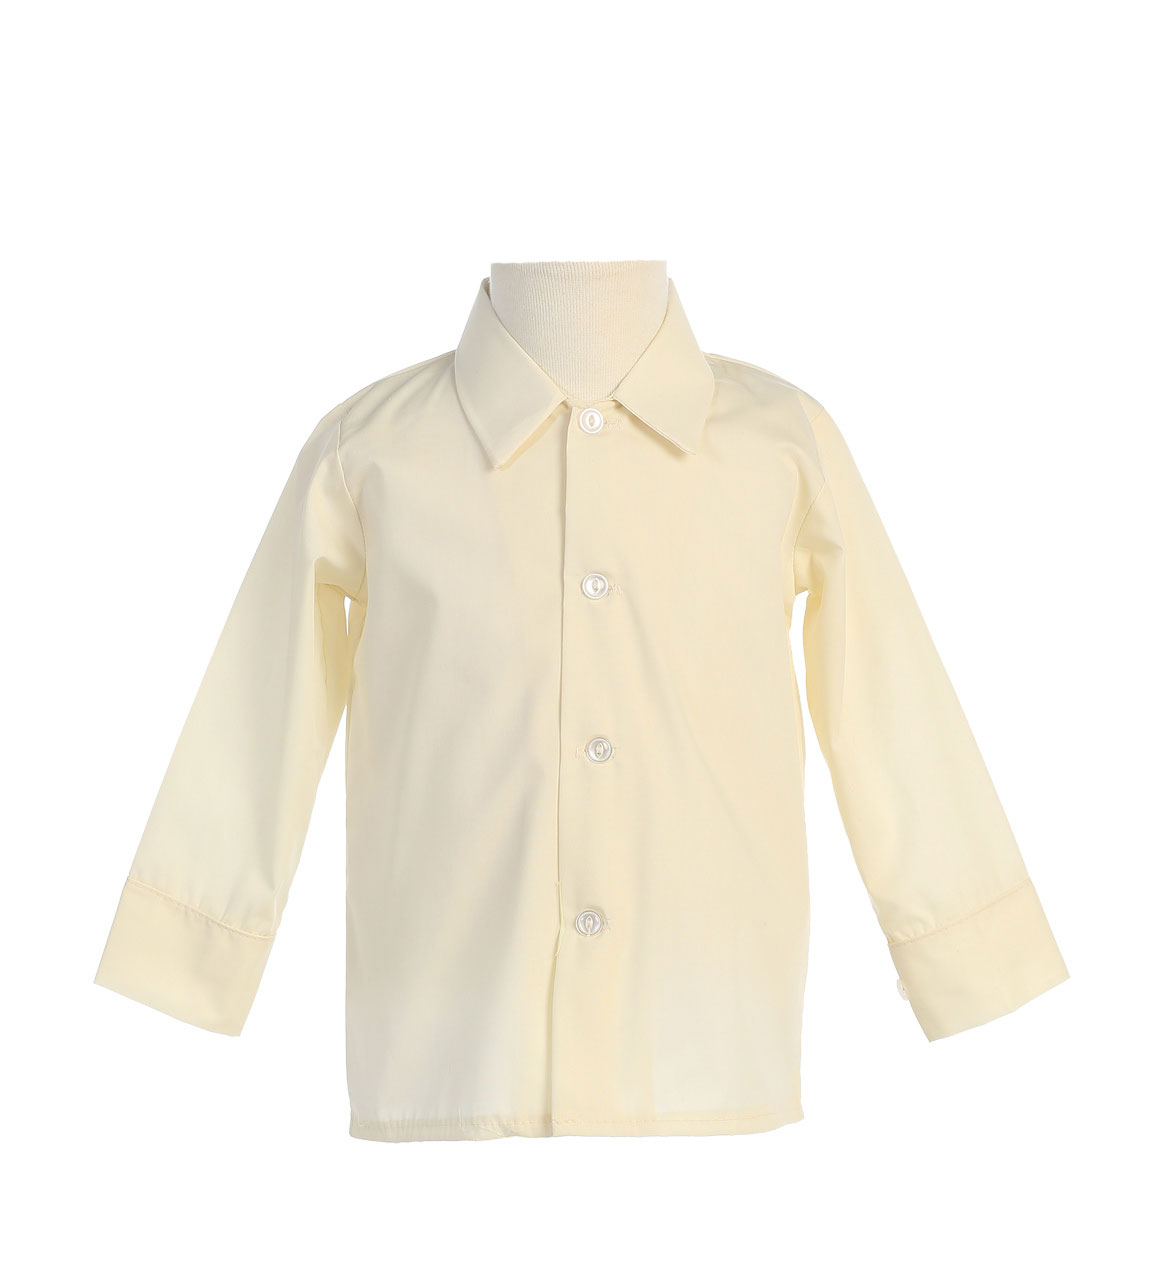 Boys Long Sleeved Simple Dress Shirt - Available in Ivory 7